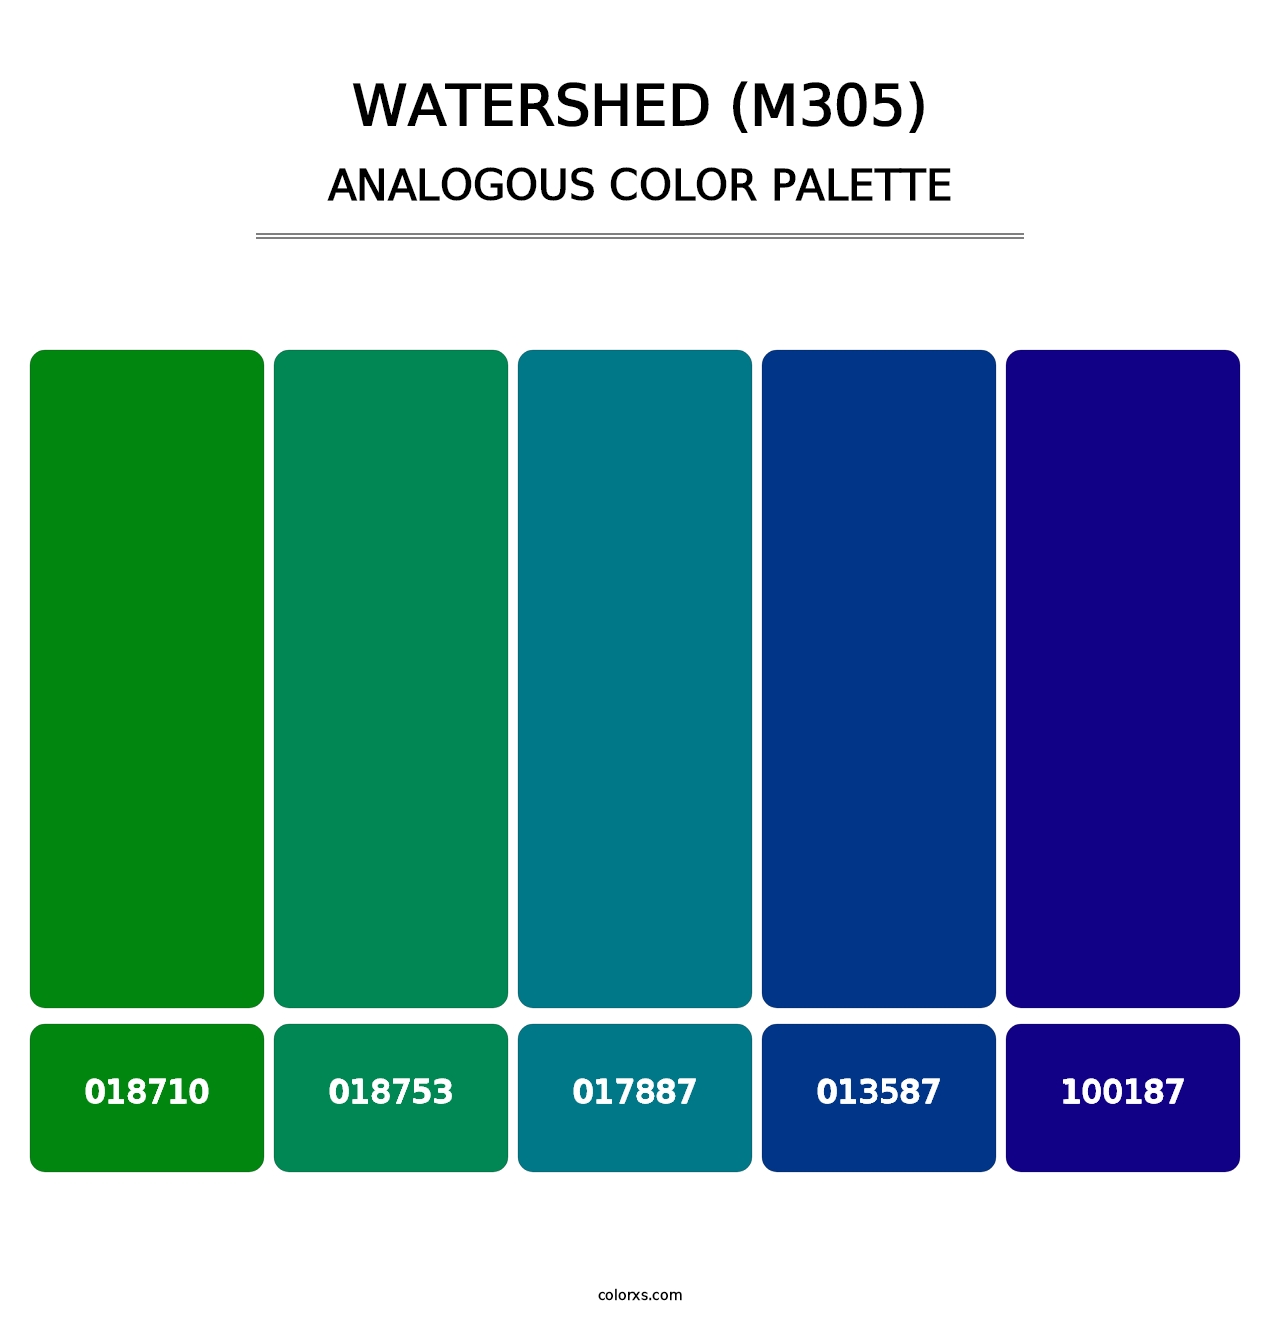 Watershed (M305) - Analogous Color Palette